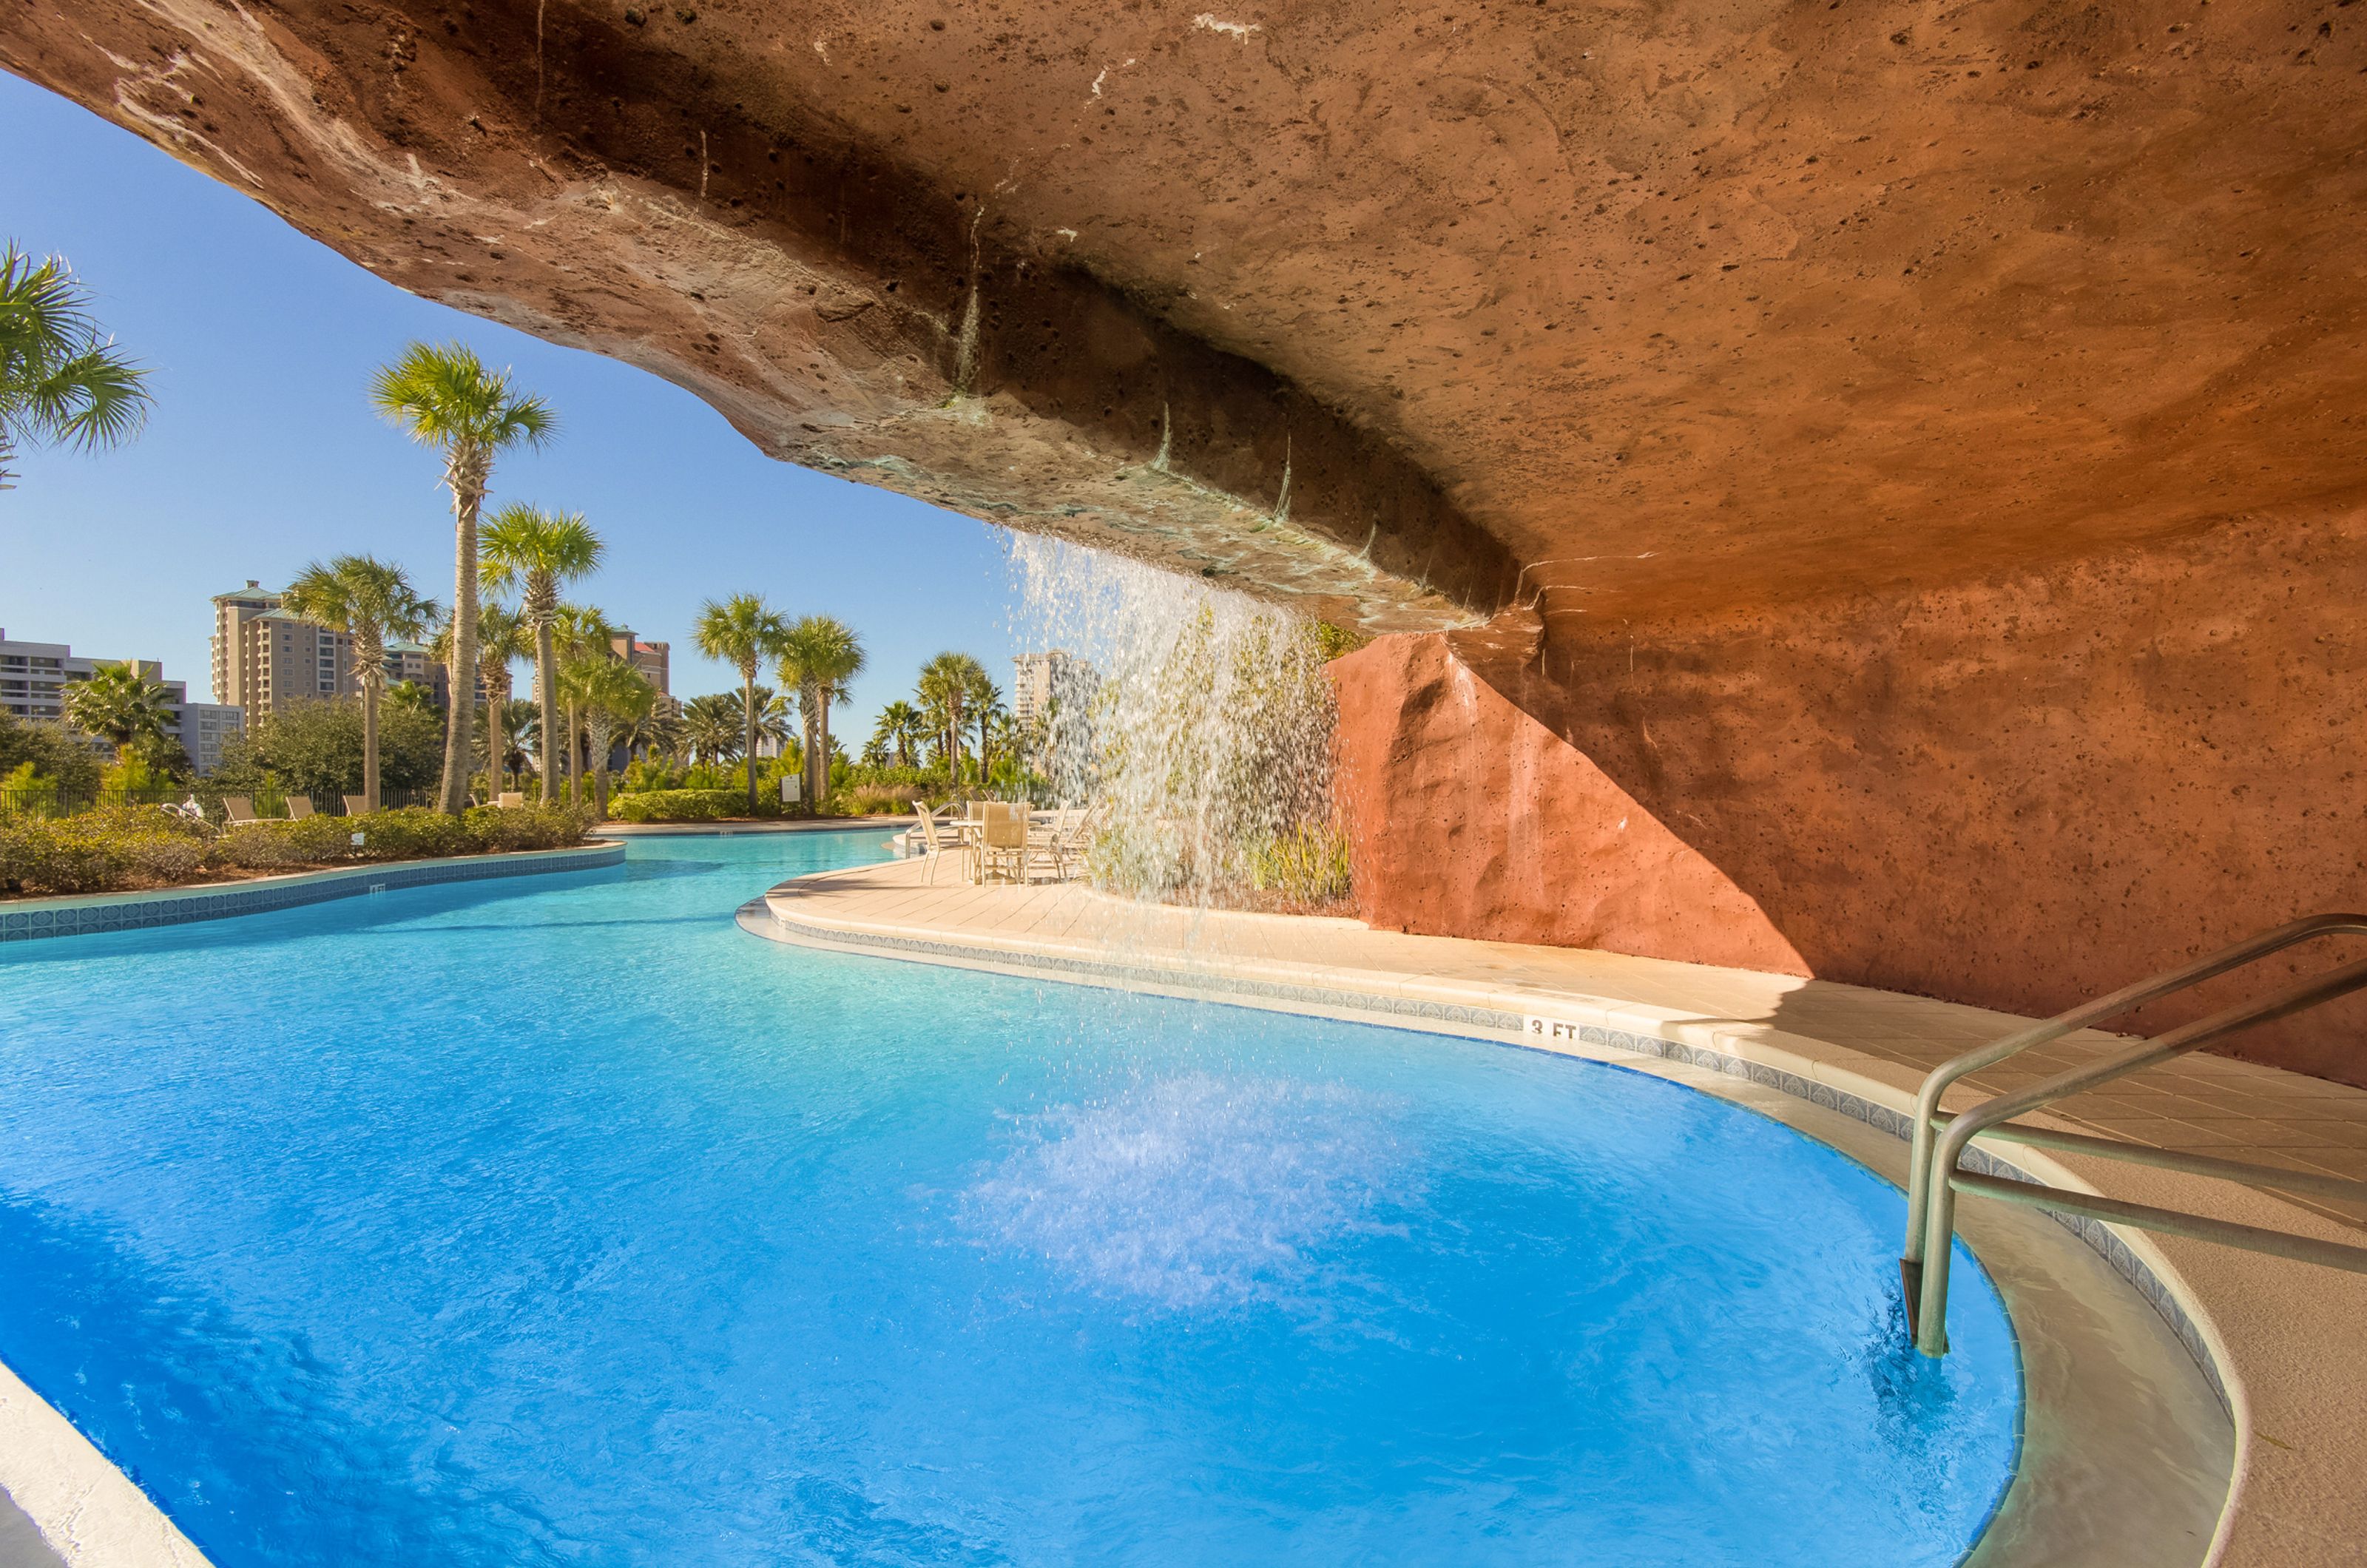 One end of the lagoon pool winds up in a cave-like structure with a waterfall cascading over the entrance